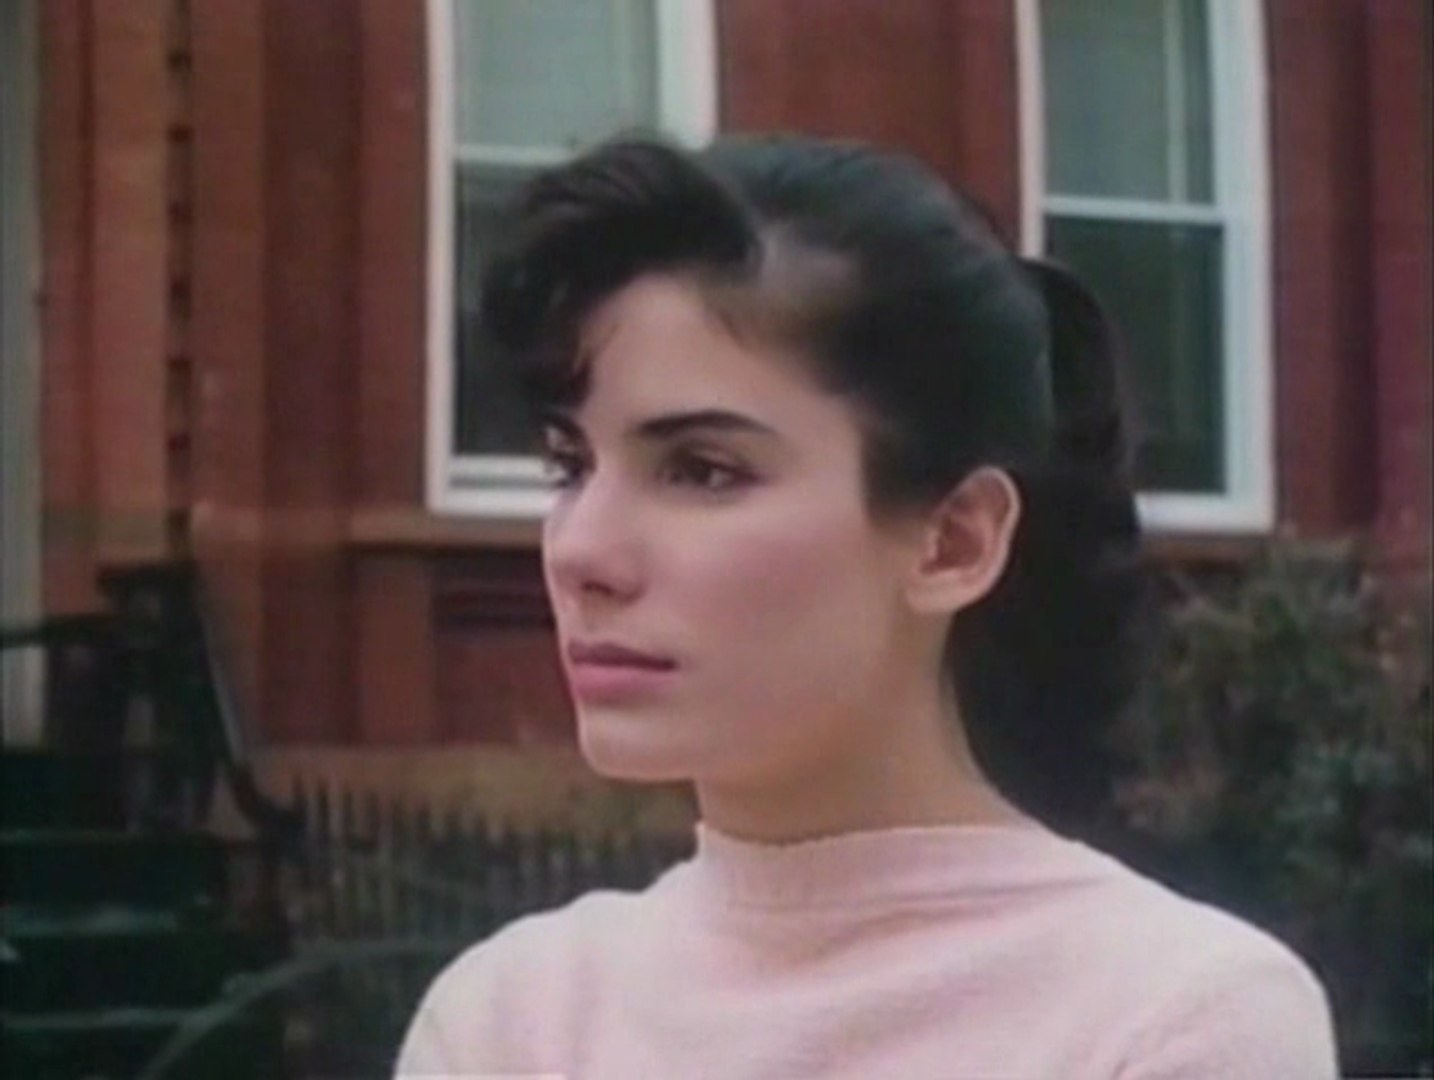 A young Sandra Bullock has a 1950s ponytail hairstyle and looks emotionally into the distance